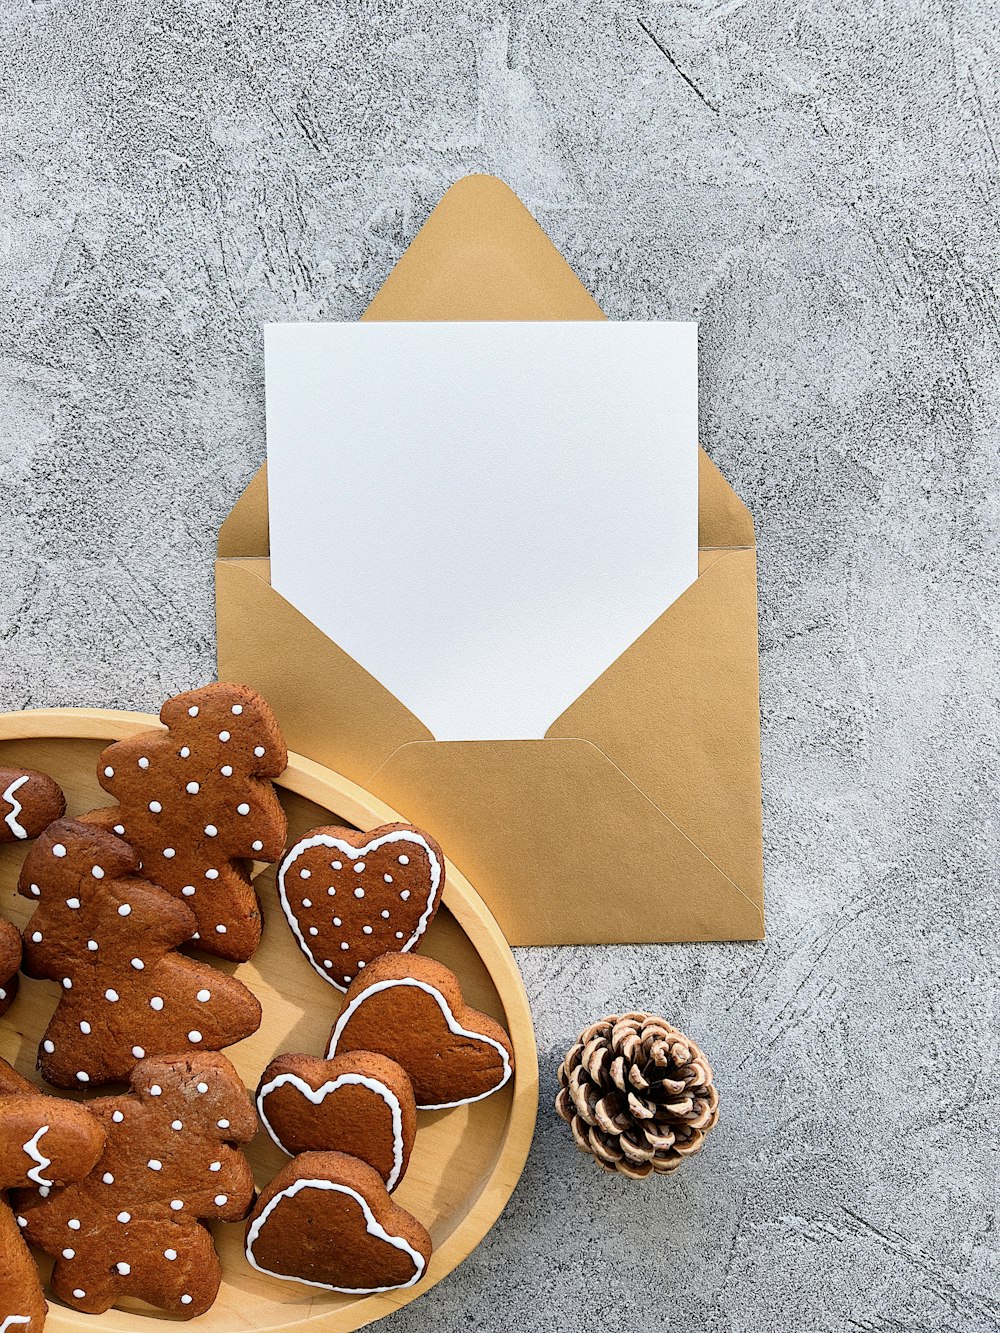 a plate of heart shaped cookies next to an envelope